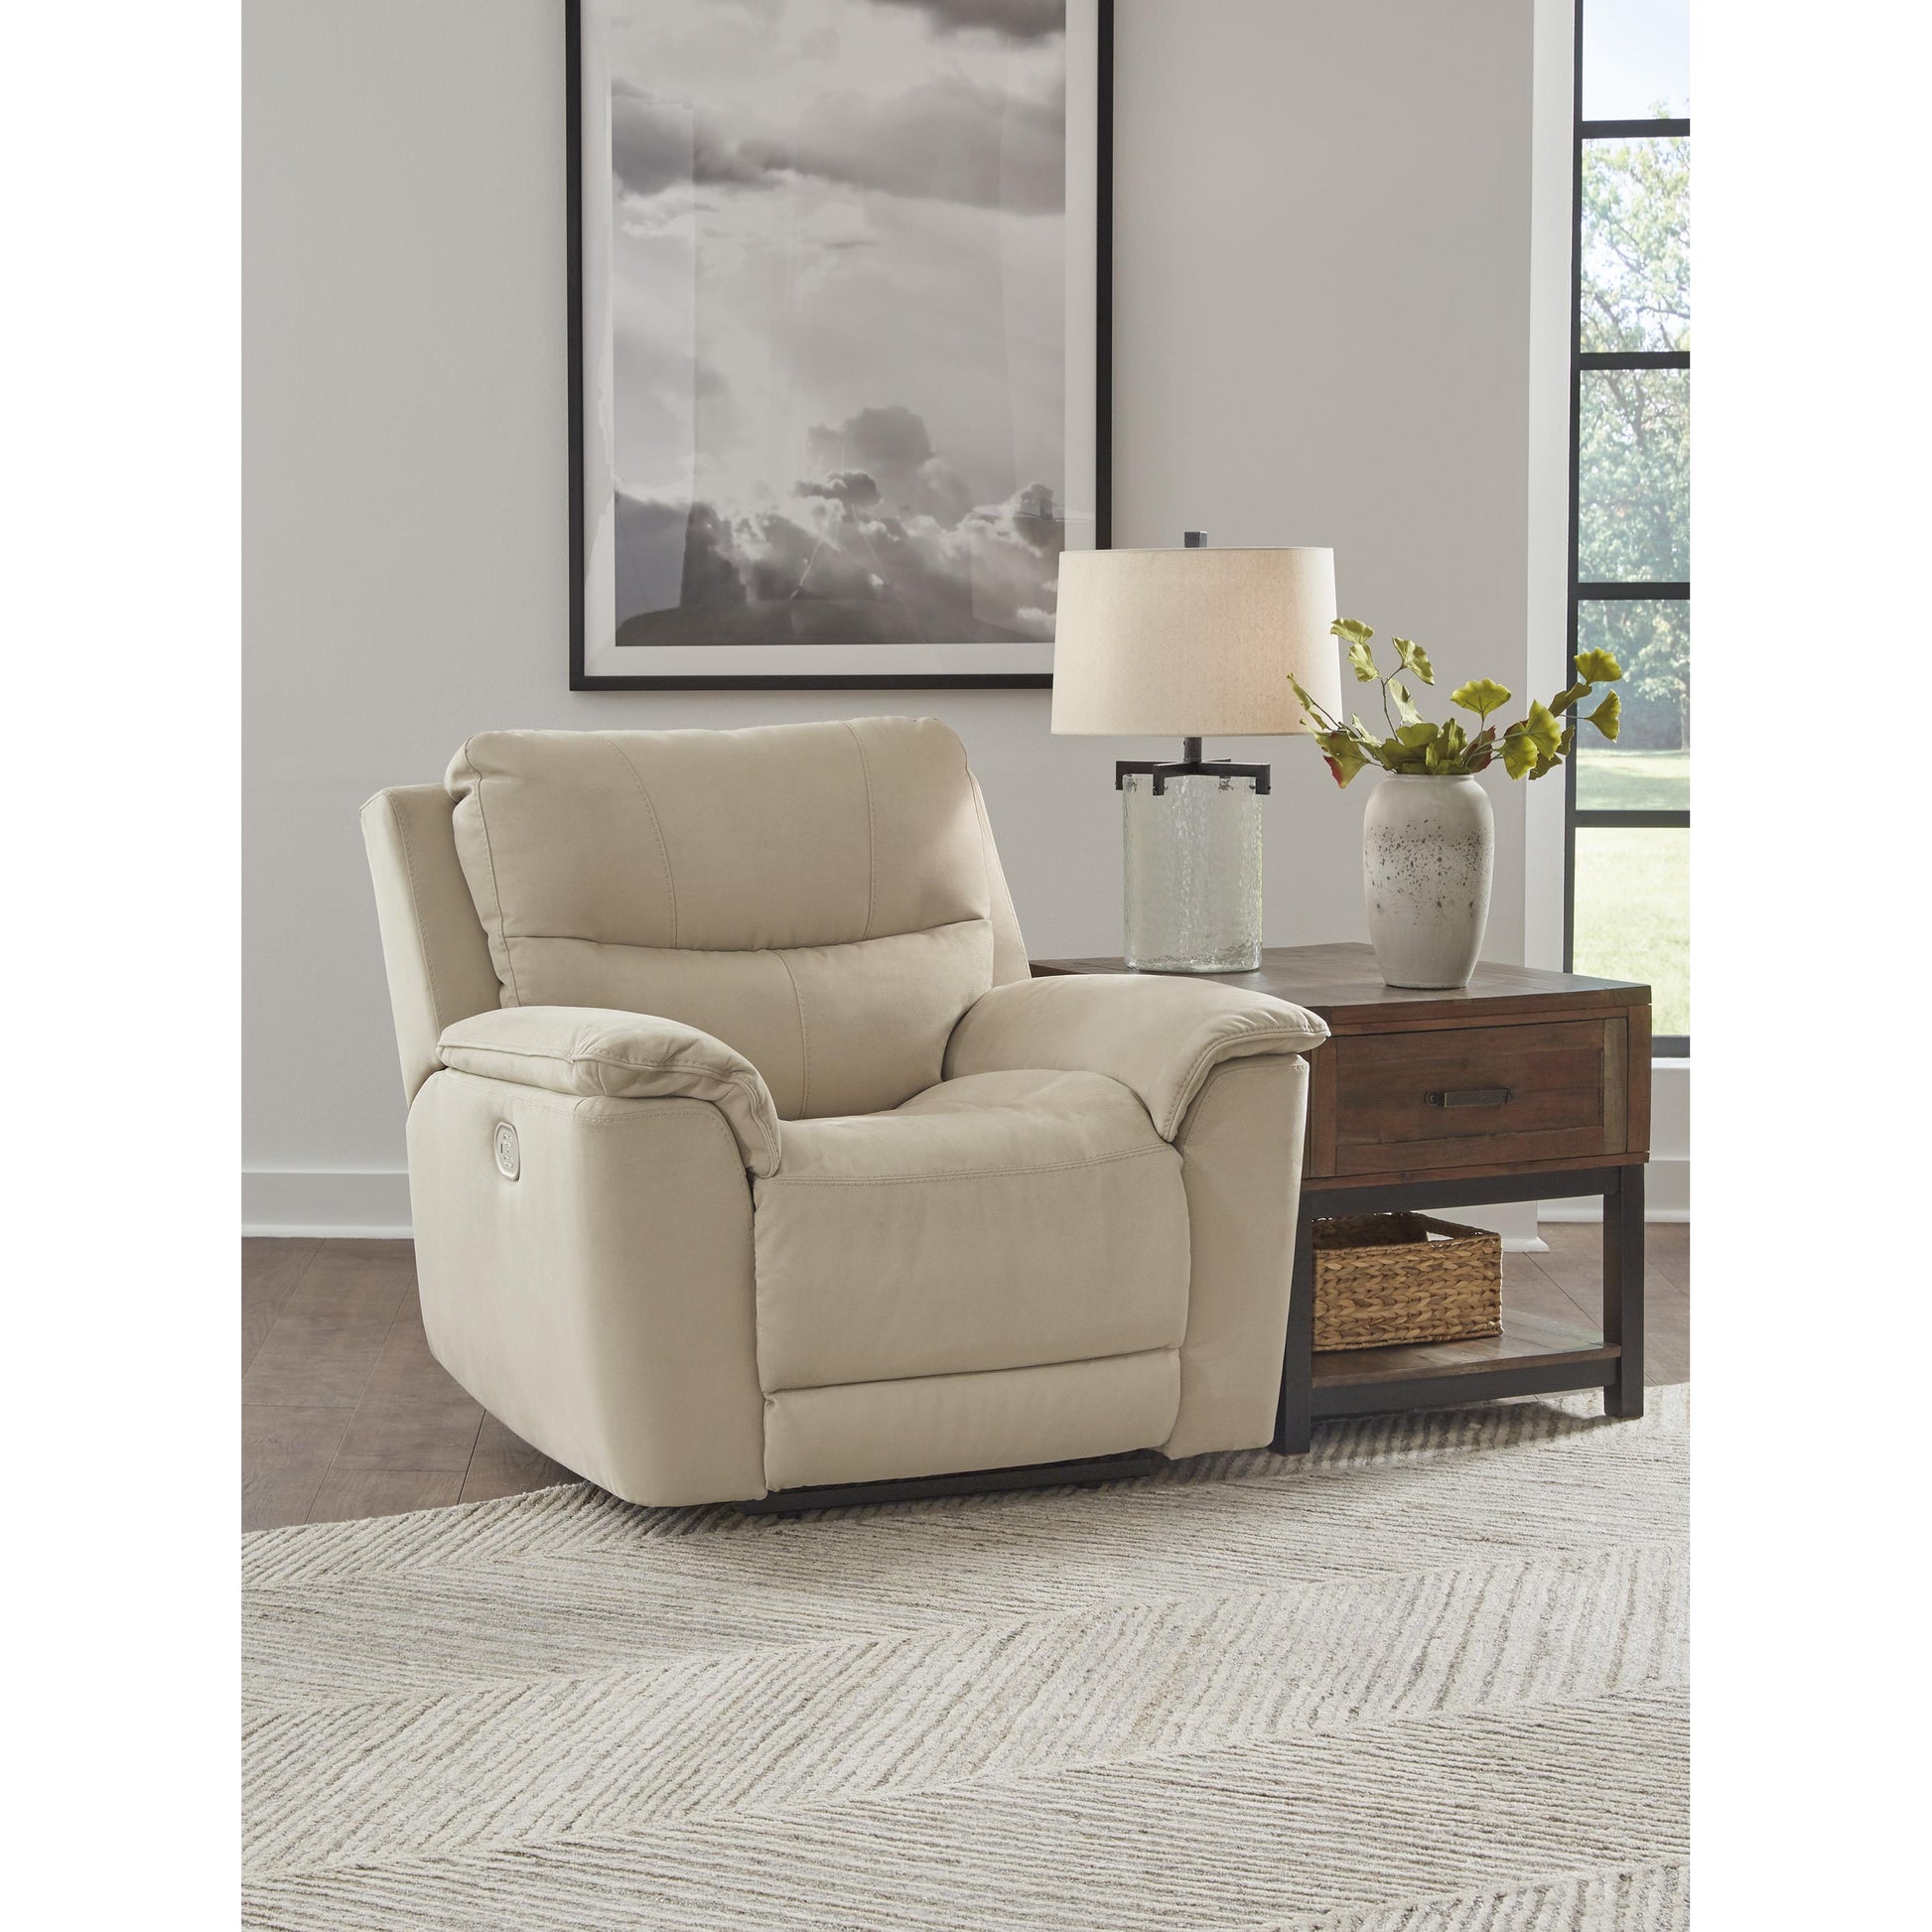 Signature Design by Ashley Next-Gen Gaucho Power Leather Look Recliner 6080713 IMAGE 5